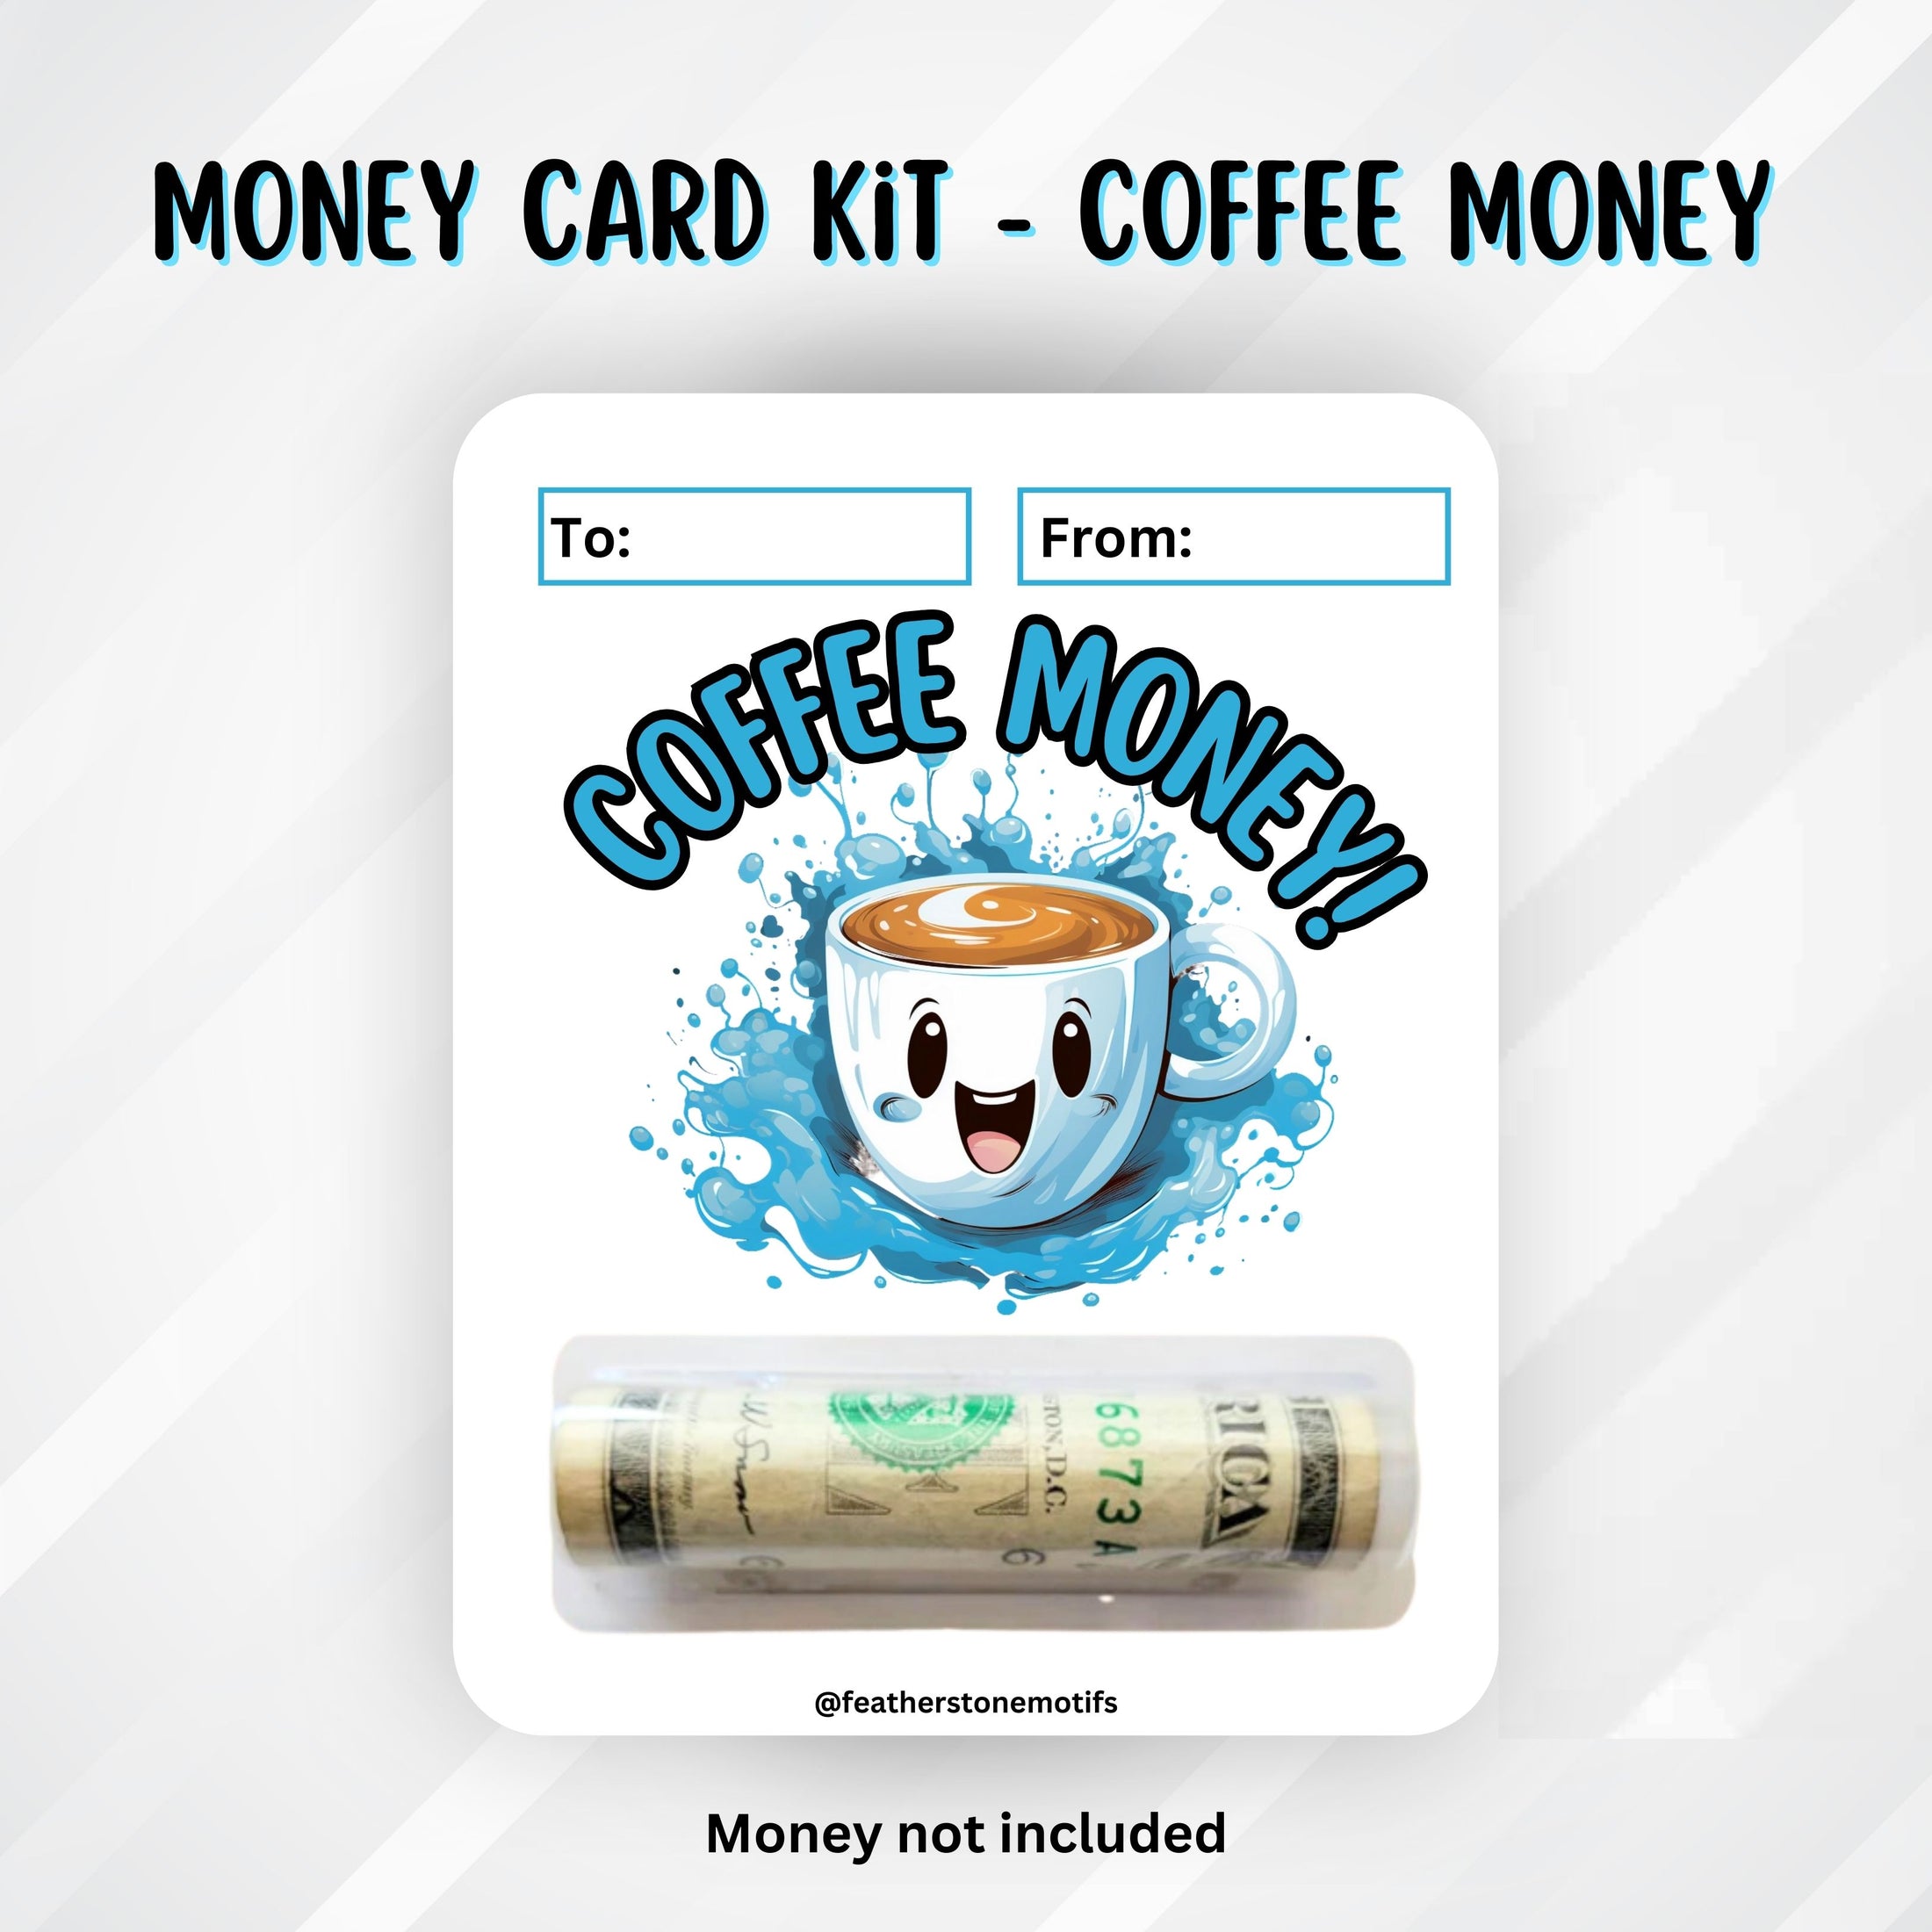 This image shows the money tube attached to the Coffee Money Card.